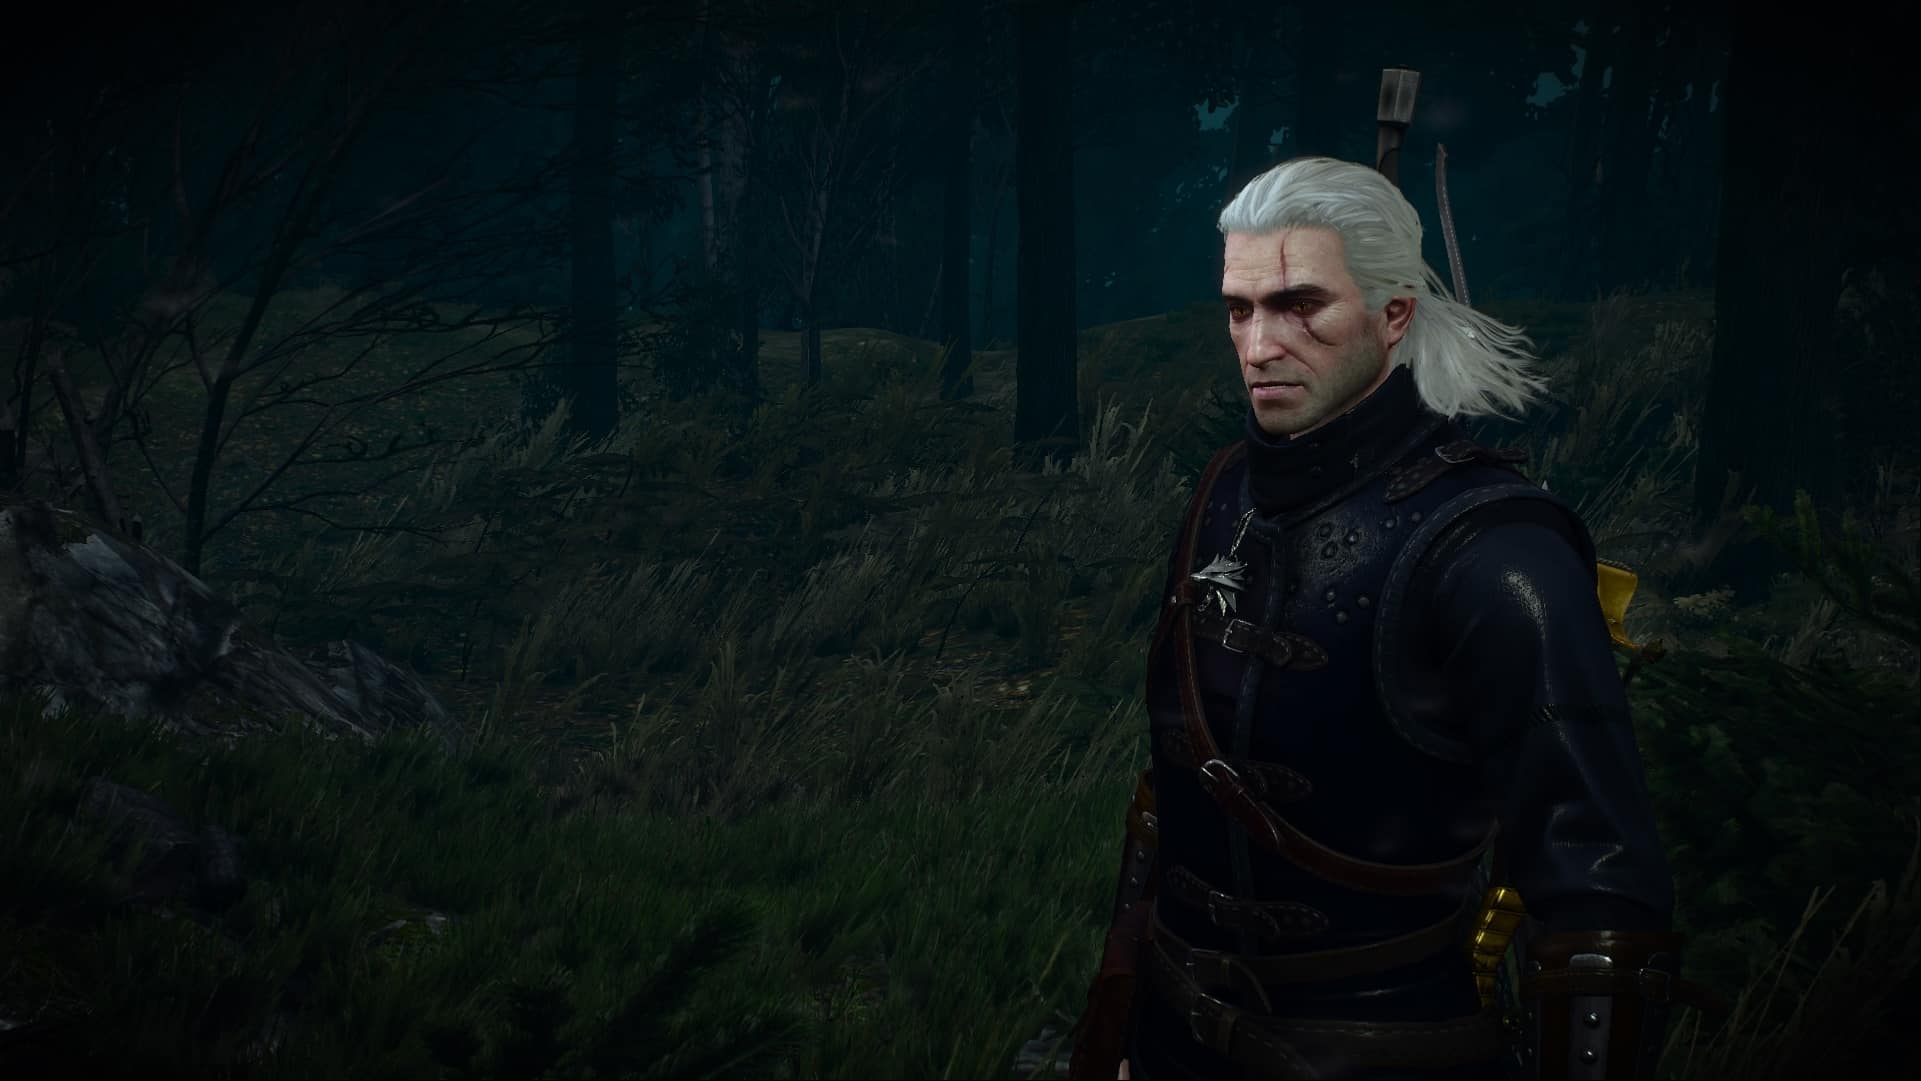 cheat codes the witcher 3 pc